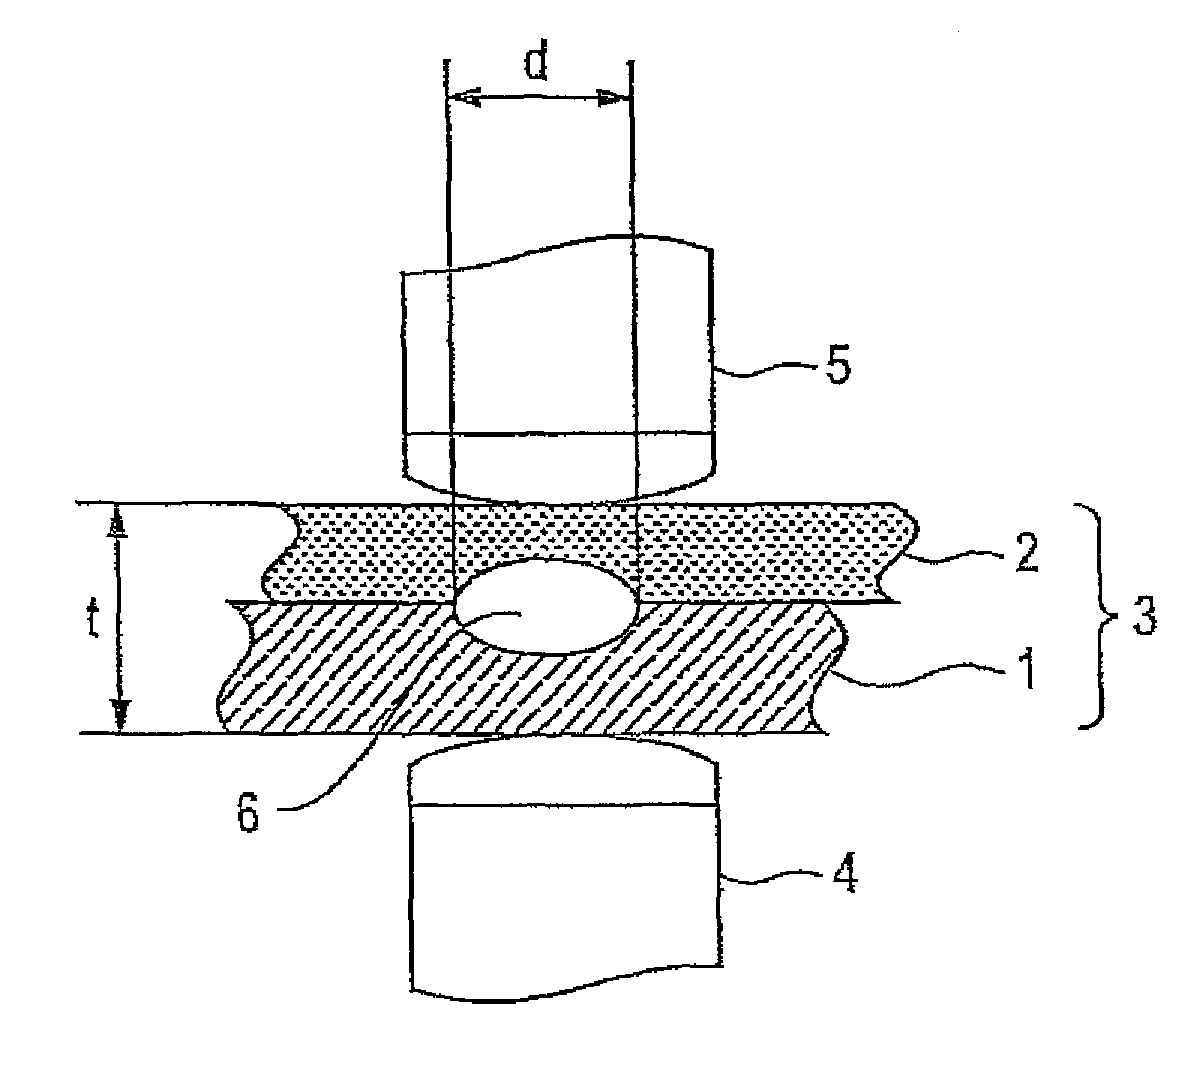 Method of resistance spot welding of high tensile strength steel sheet and welding joint manufactured by the method